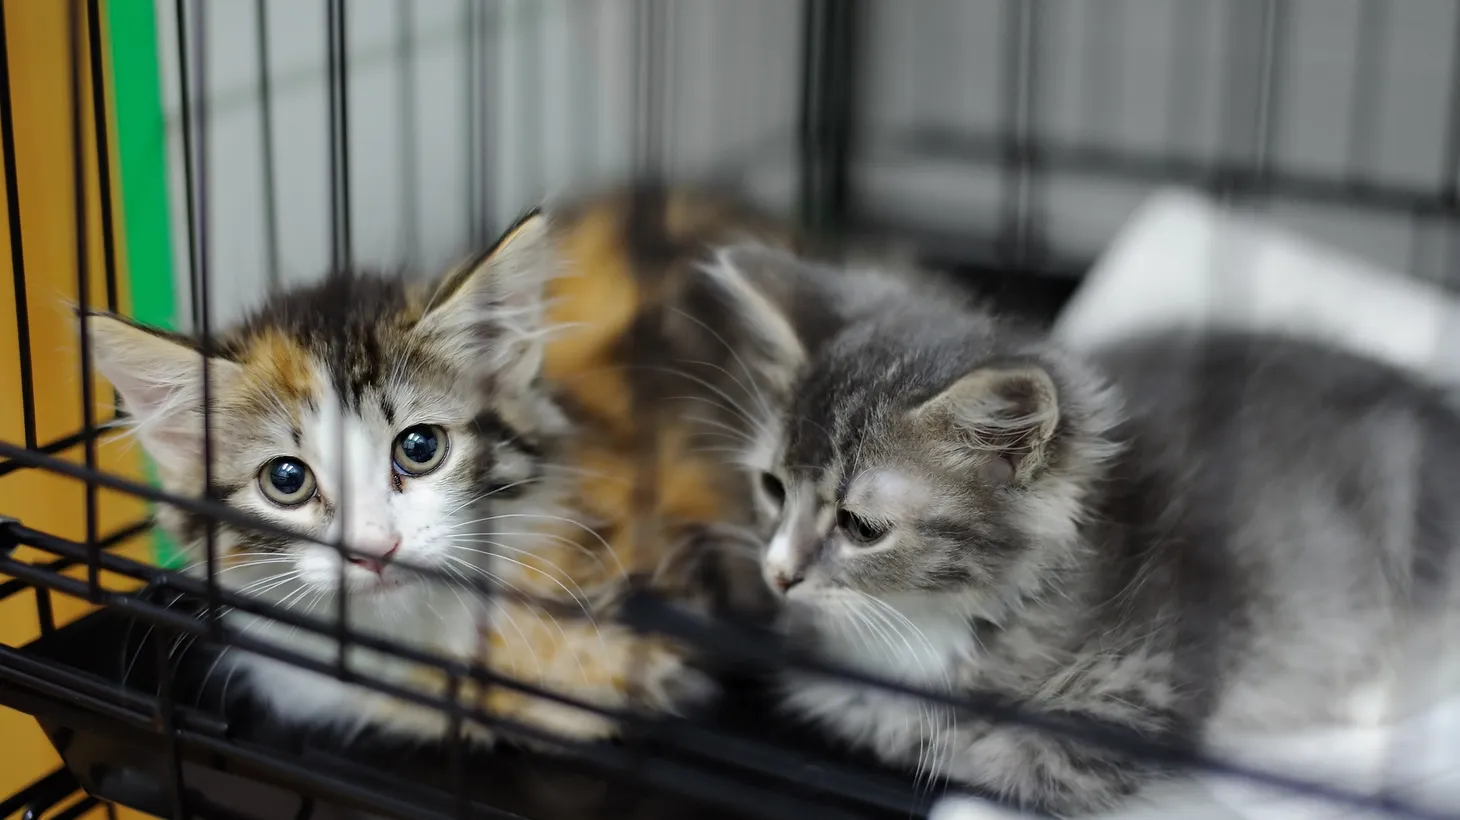 “[In] 2019, [OC] Animal Care had about 7000 adoptions. [Then in] 2020, of course because of the pandemic, it dropped dramatically, but the numbers really haven't improved since,” says Gustavo Arellano, columnist for the LA Times.